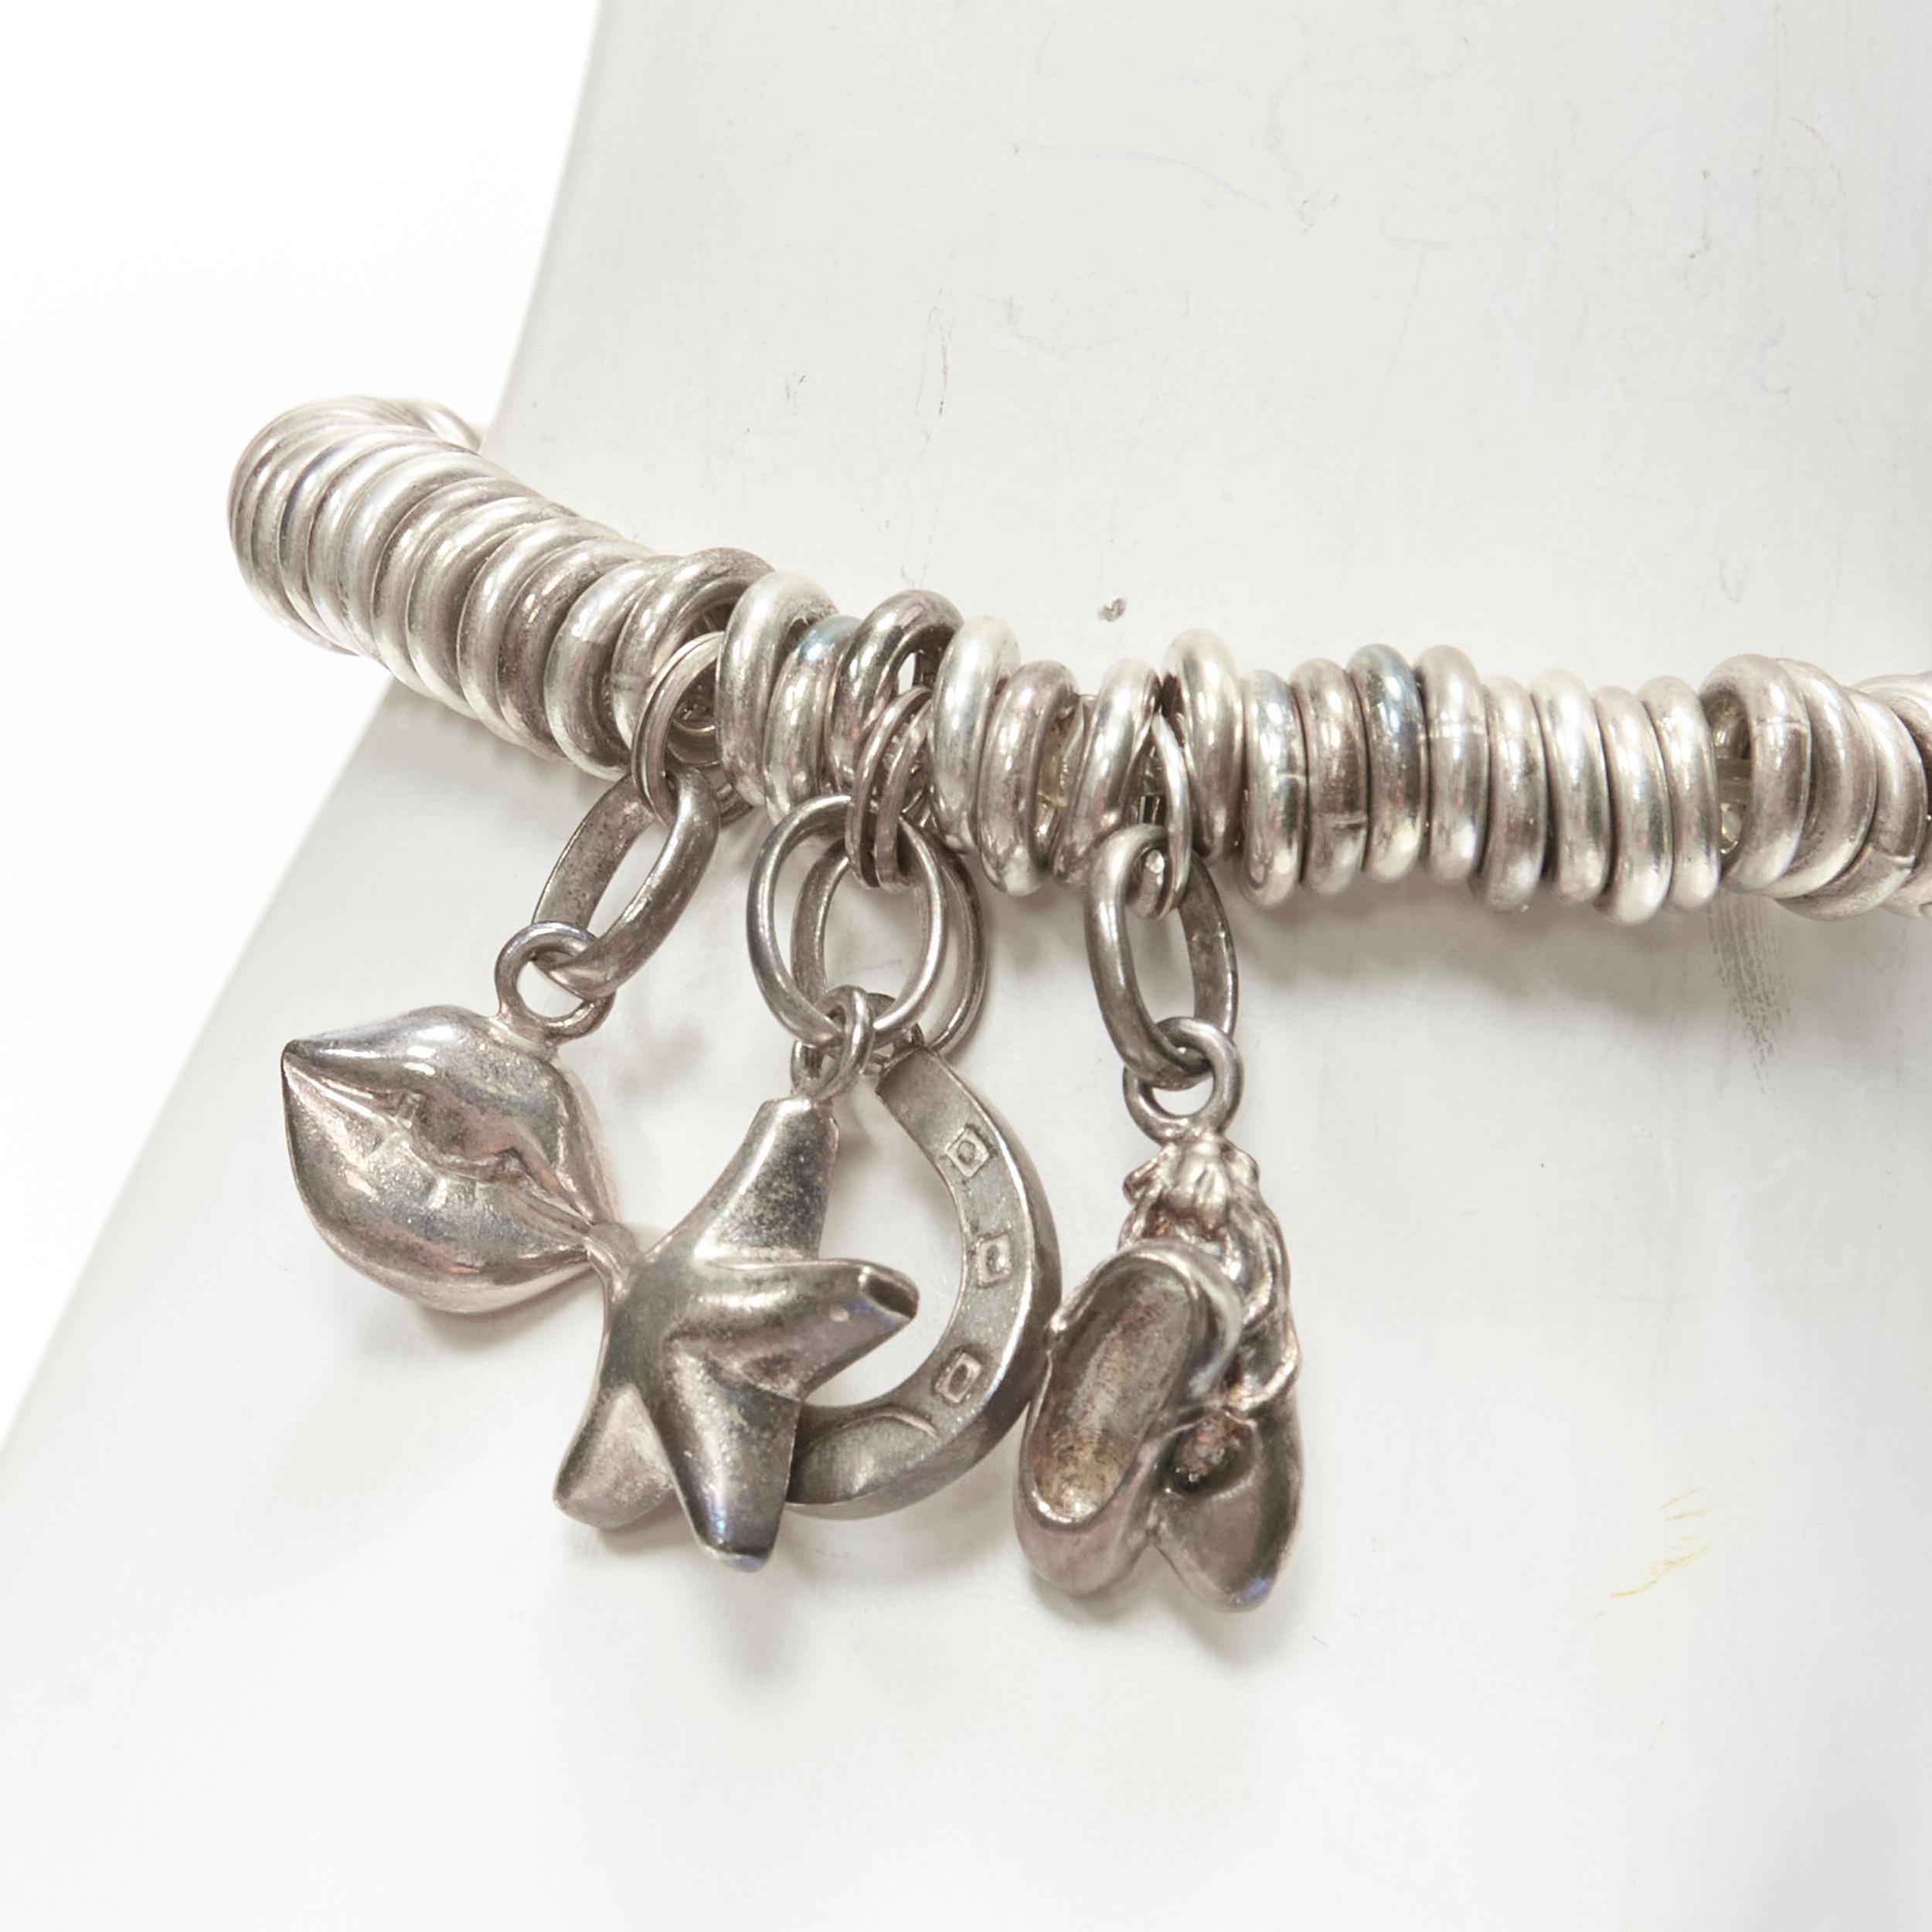 LINKS OF LONDON sterling silver star horsebit lips ballet charm bracelet
Reference: ANWU/A00282
Brand: Links of London
Material: Silver
Color: Silver
Pattern: Solid
Closure: Elasticated

CONDITION:
Condition: Good, this item was pre-owned and is in